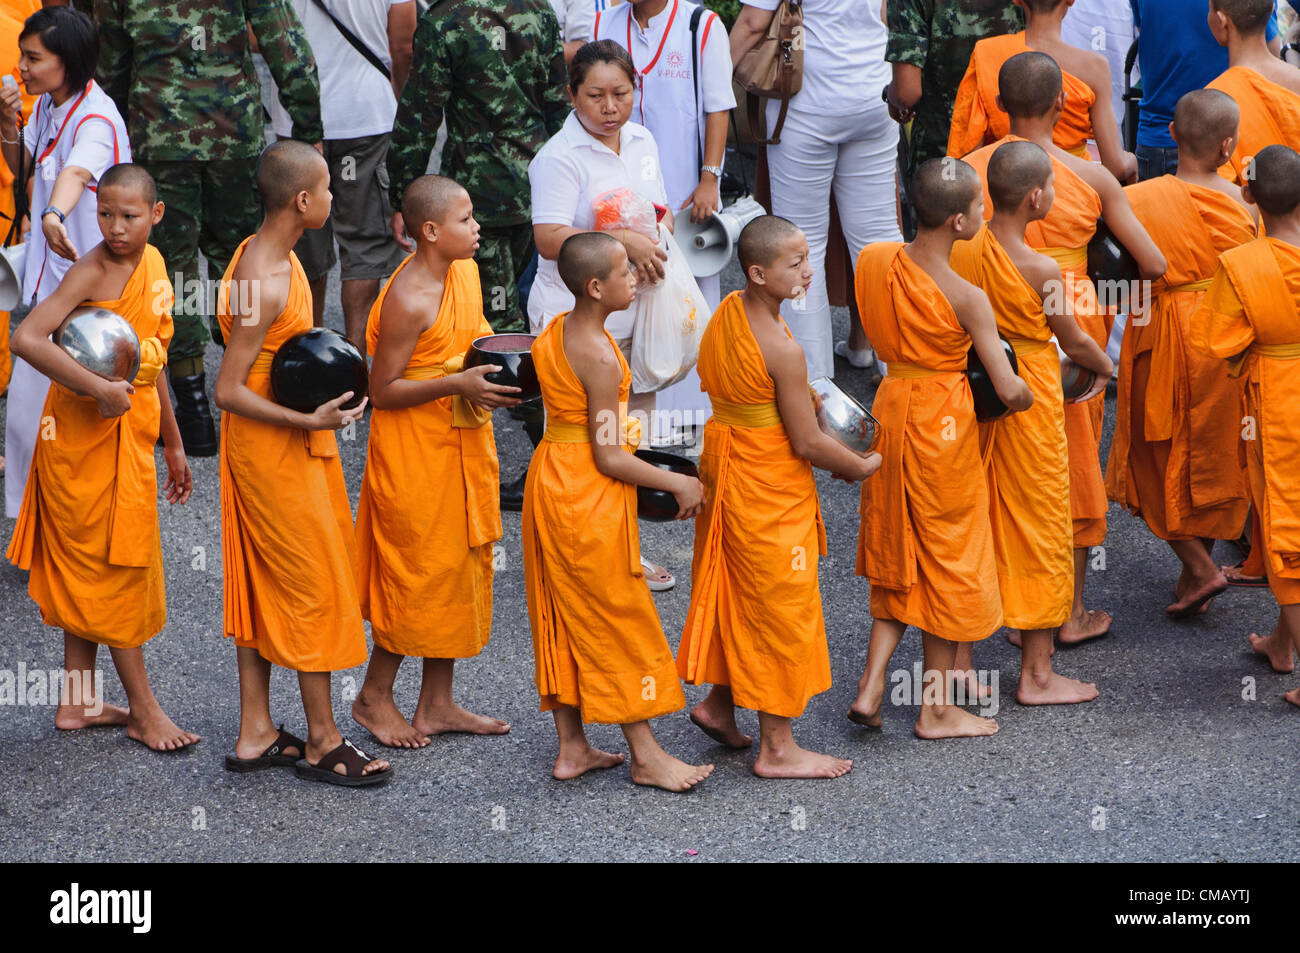 Some of the 12,600 monks at an Alms giving ceremony in downtown Bangkok, Thailand on July 7th, 2012. These monks are celebrating 2,600 years of the Buddha's enlightenment. Stock Photo